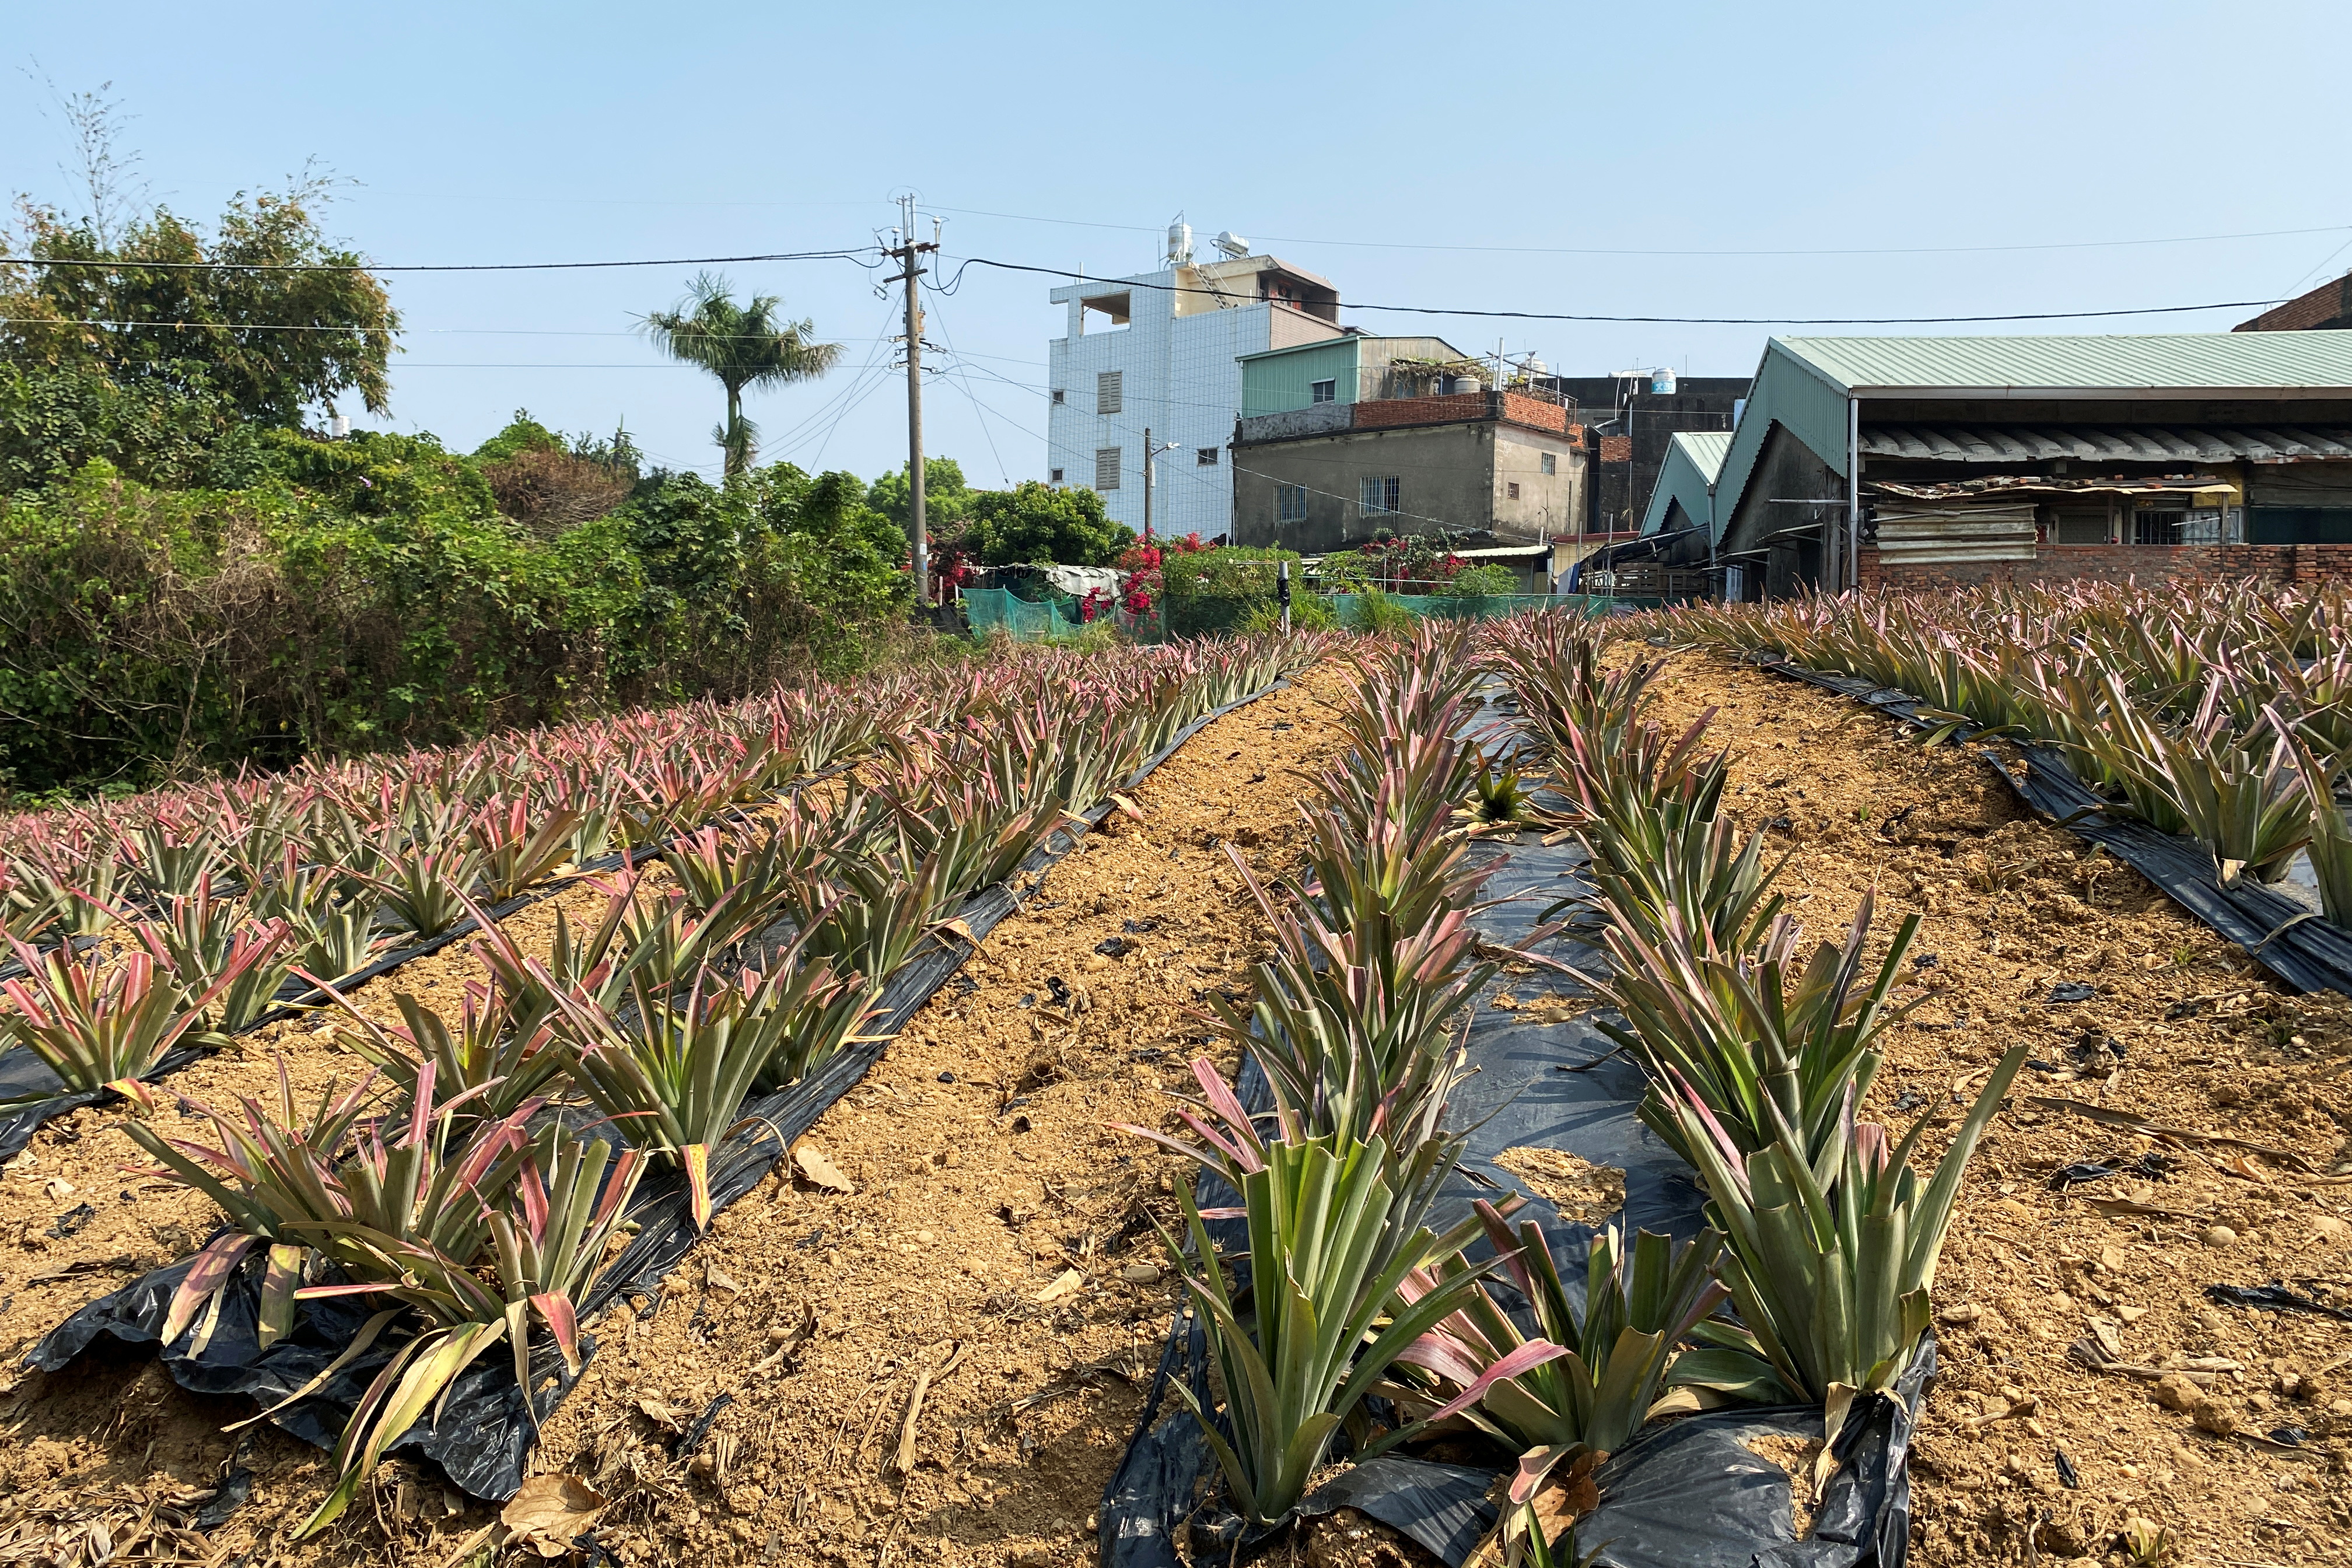 Pineapples grow in a field in Kaohsiung